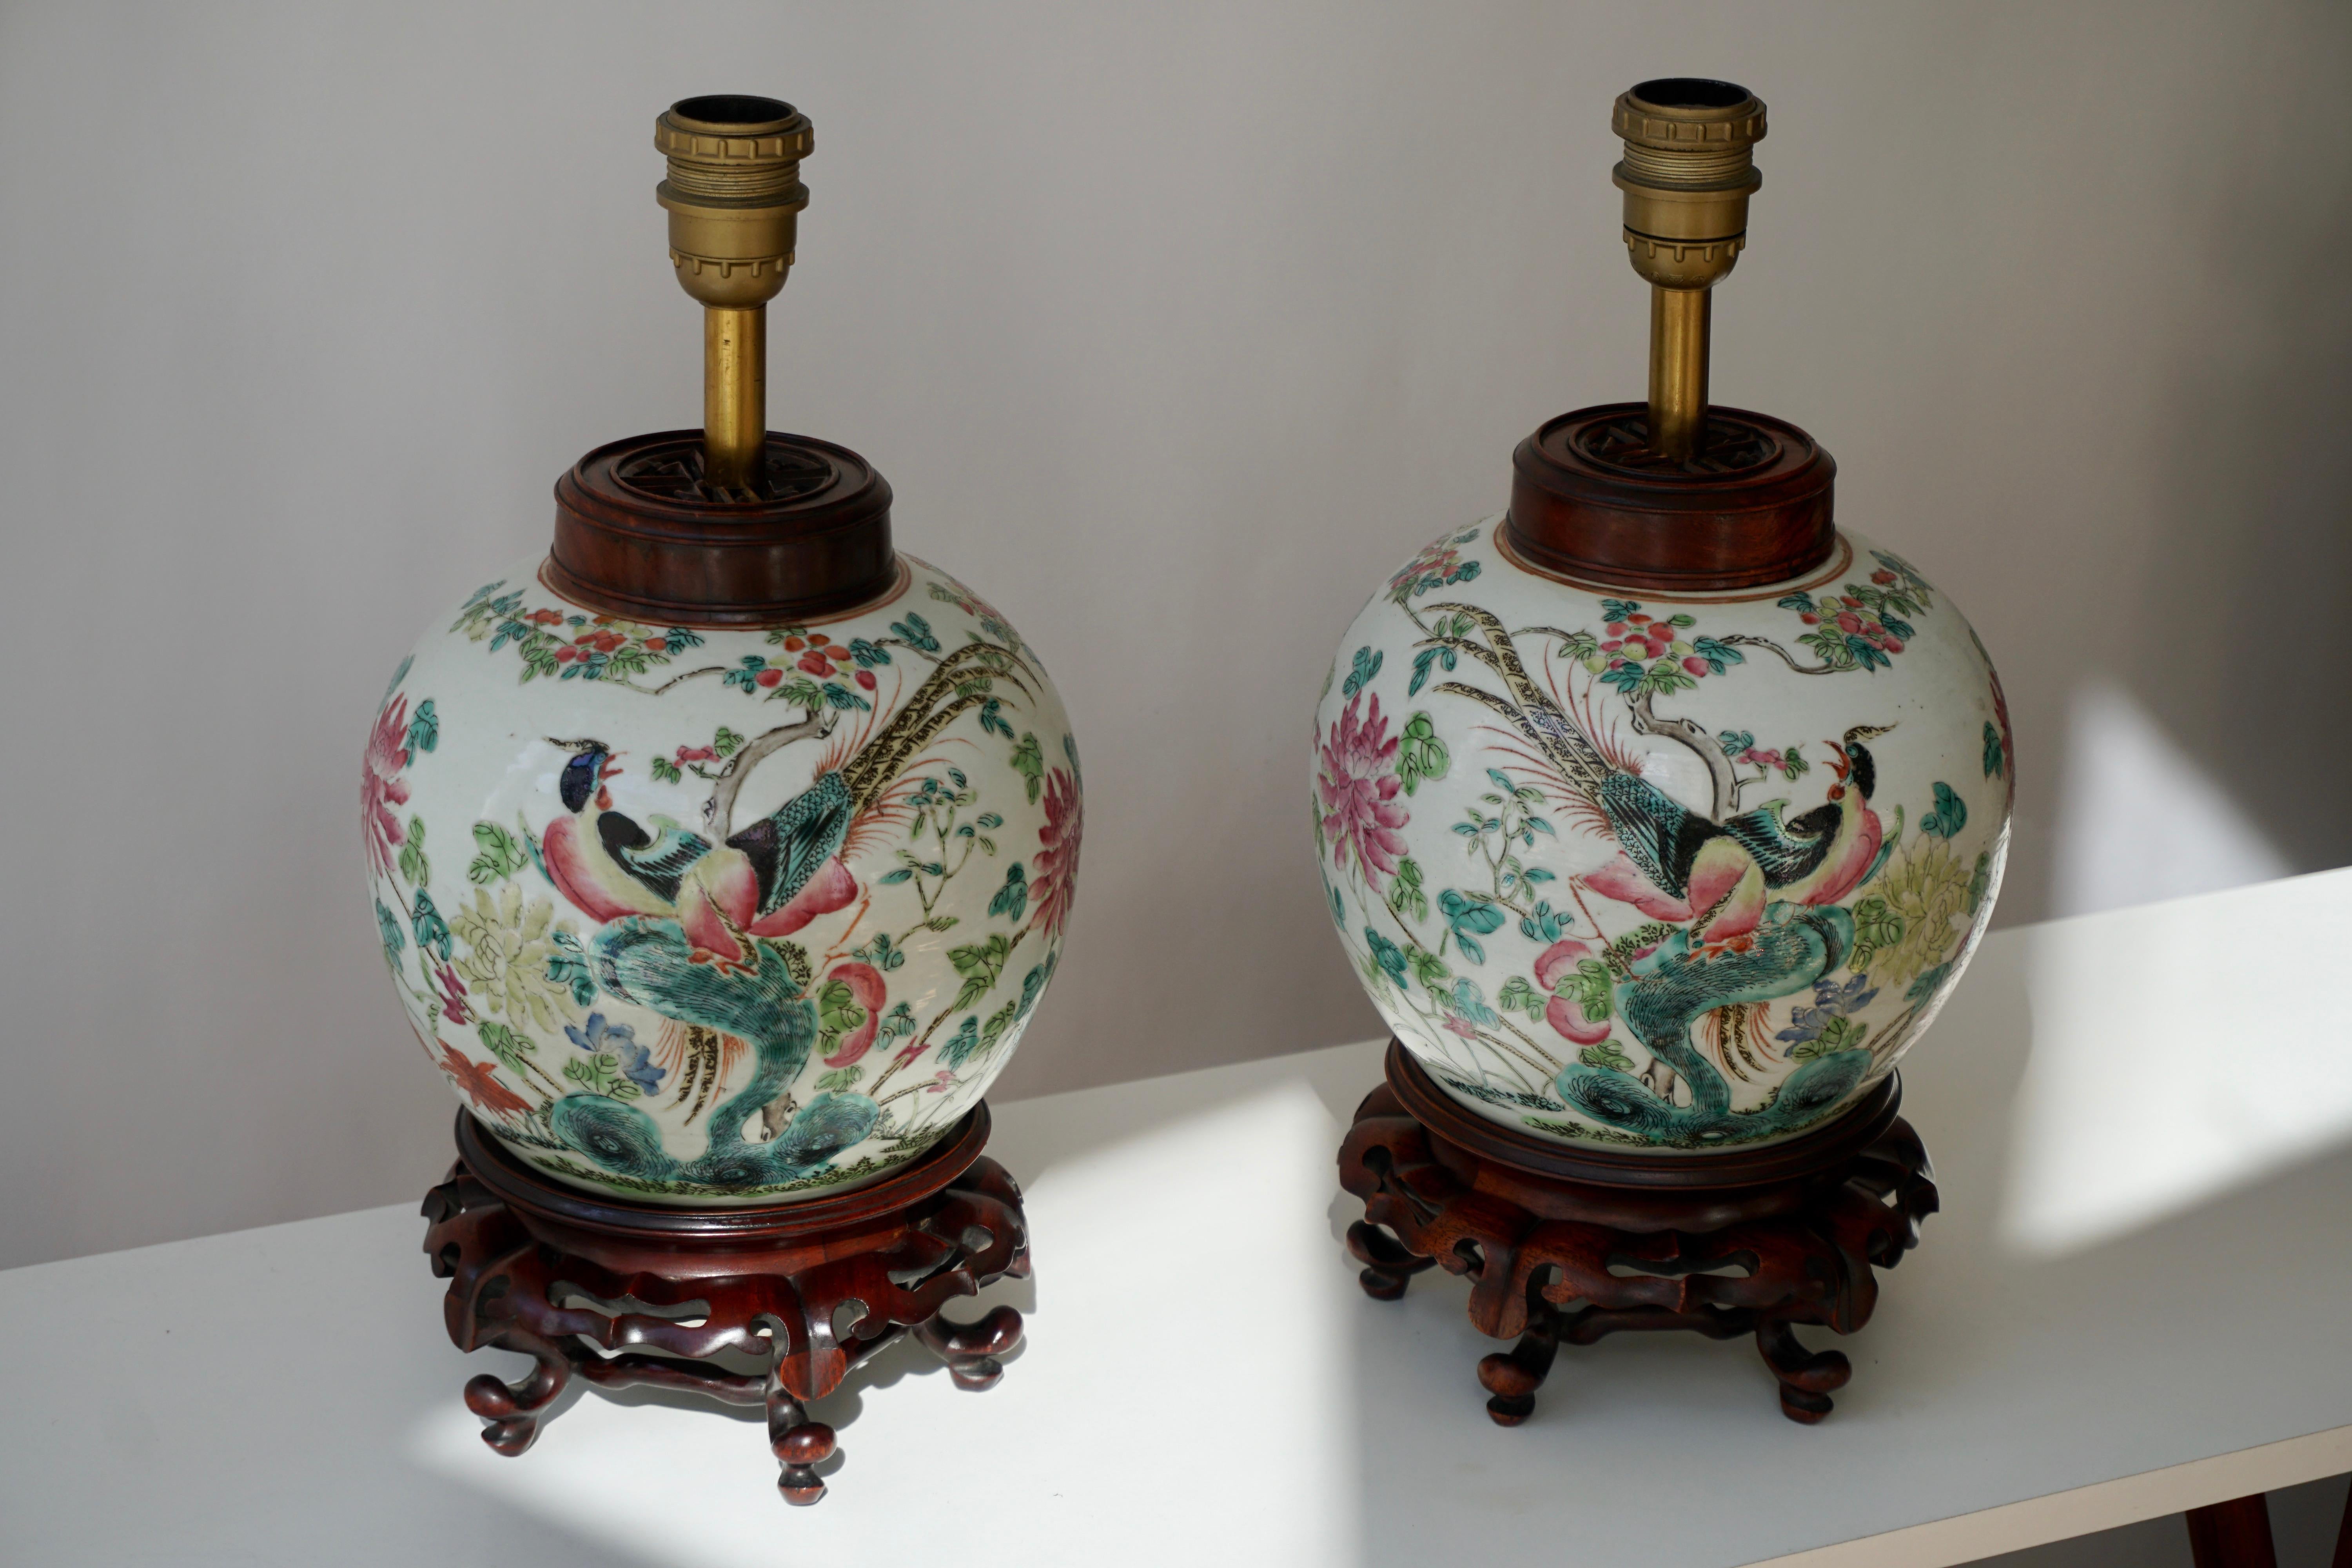 Pair of elegant Chinese porcelain painted table lamps with beautiful colorful hand painted birds, butterflys and flowers. 
Each of these hand painted ginger jars have wooden lids and are mounted as table lamps on a wooden base.
Diameter 21